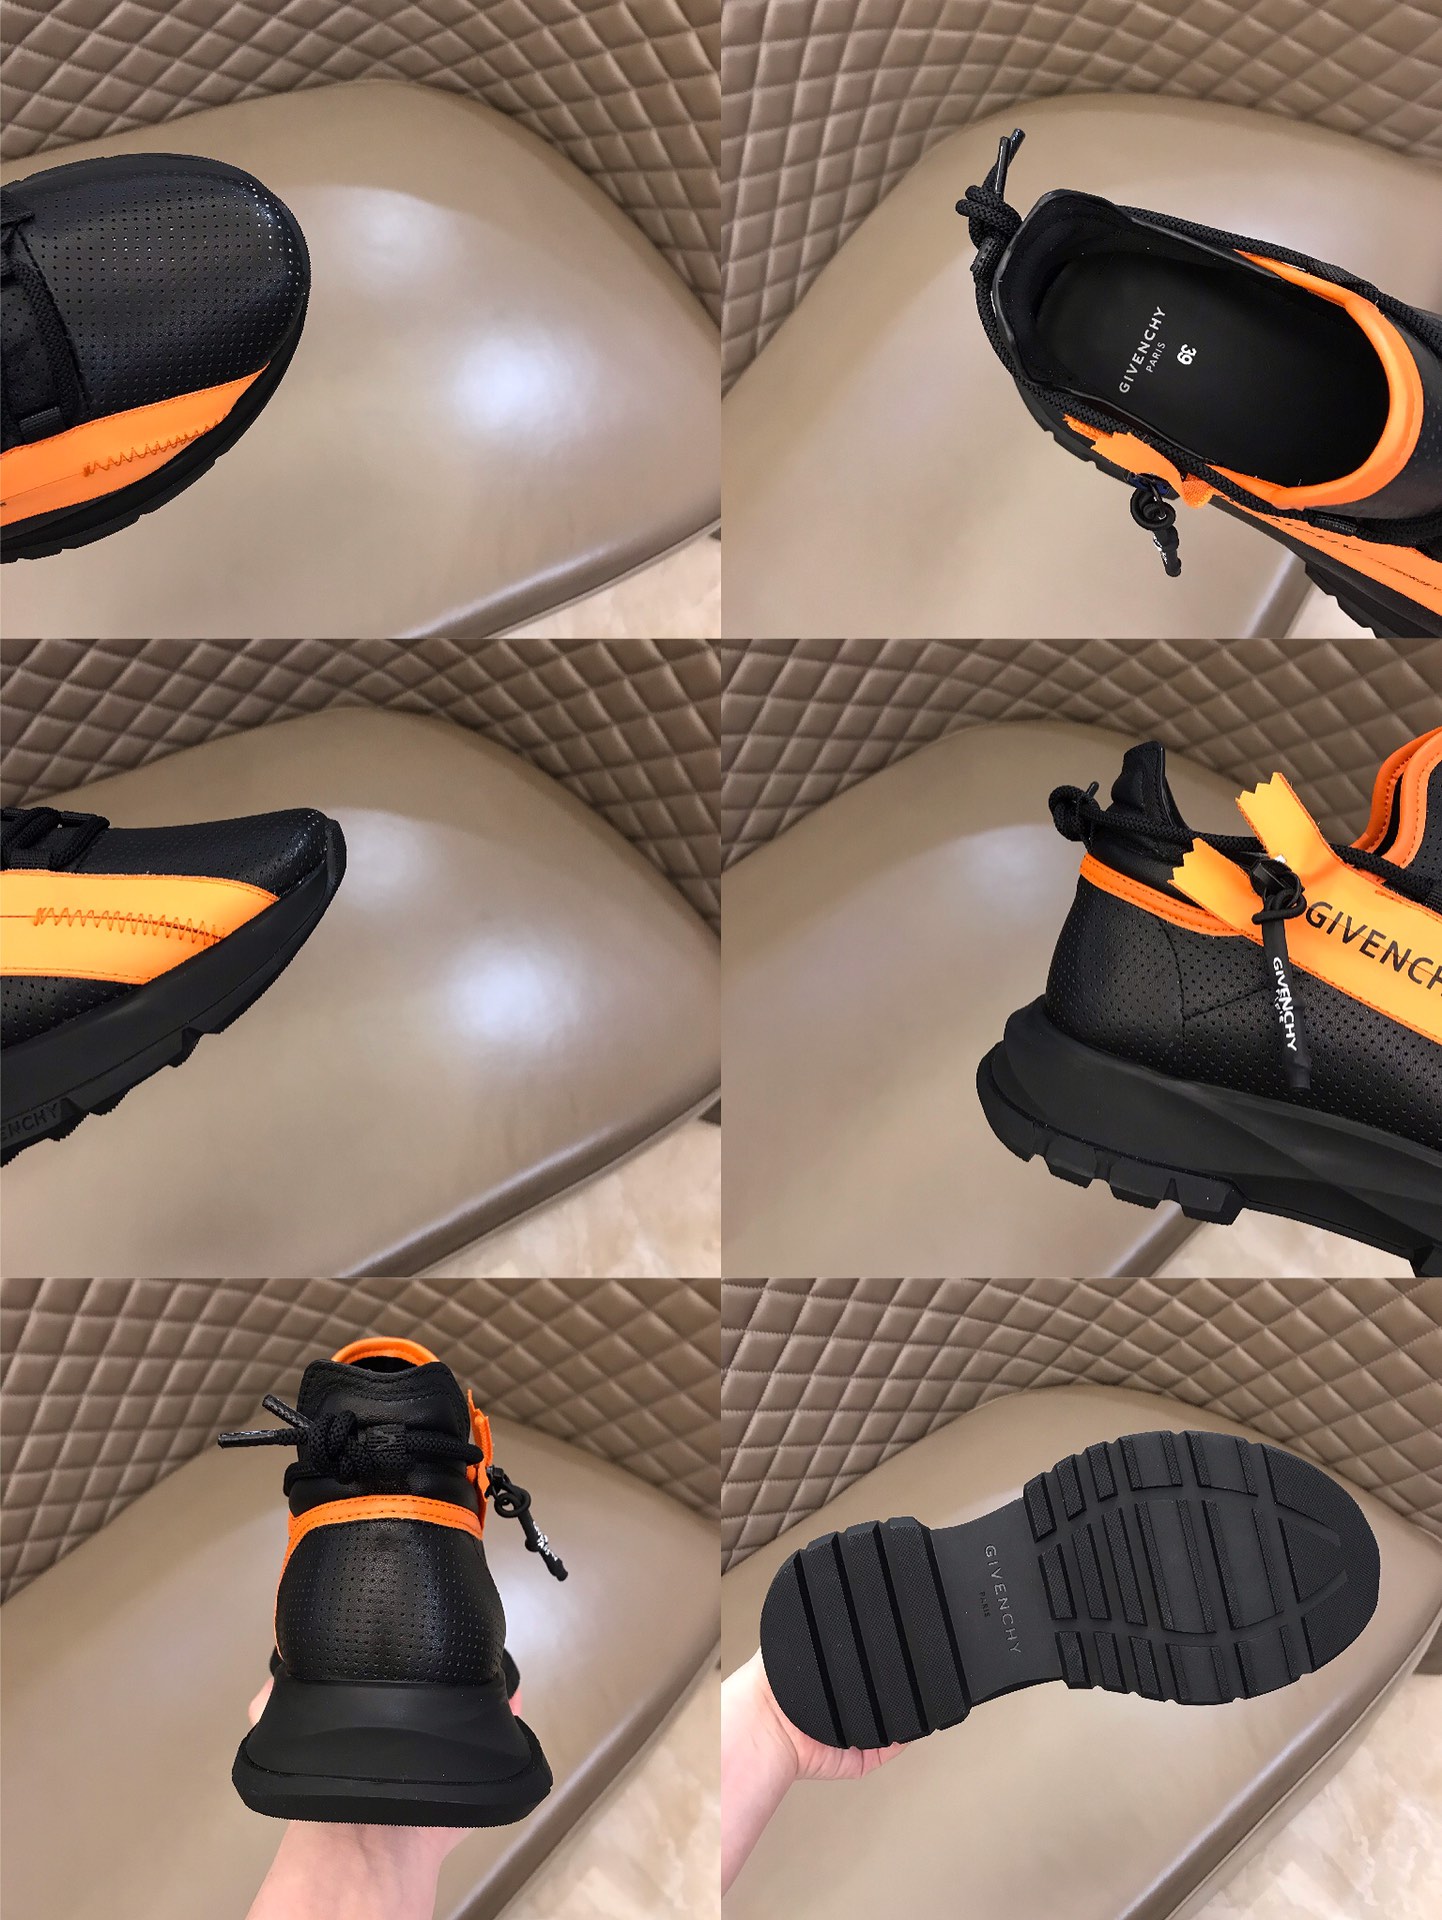 Givenchy Sneaker Spectre in Black with Orange